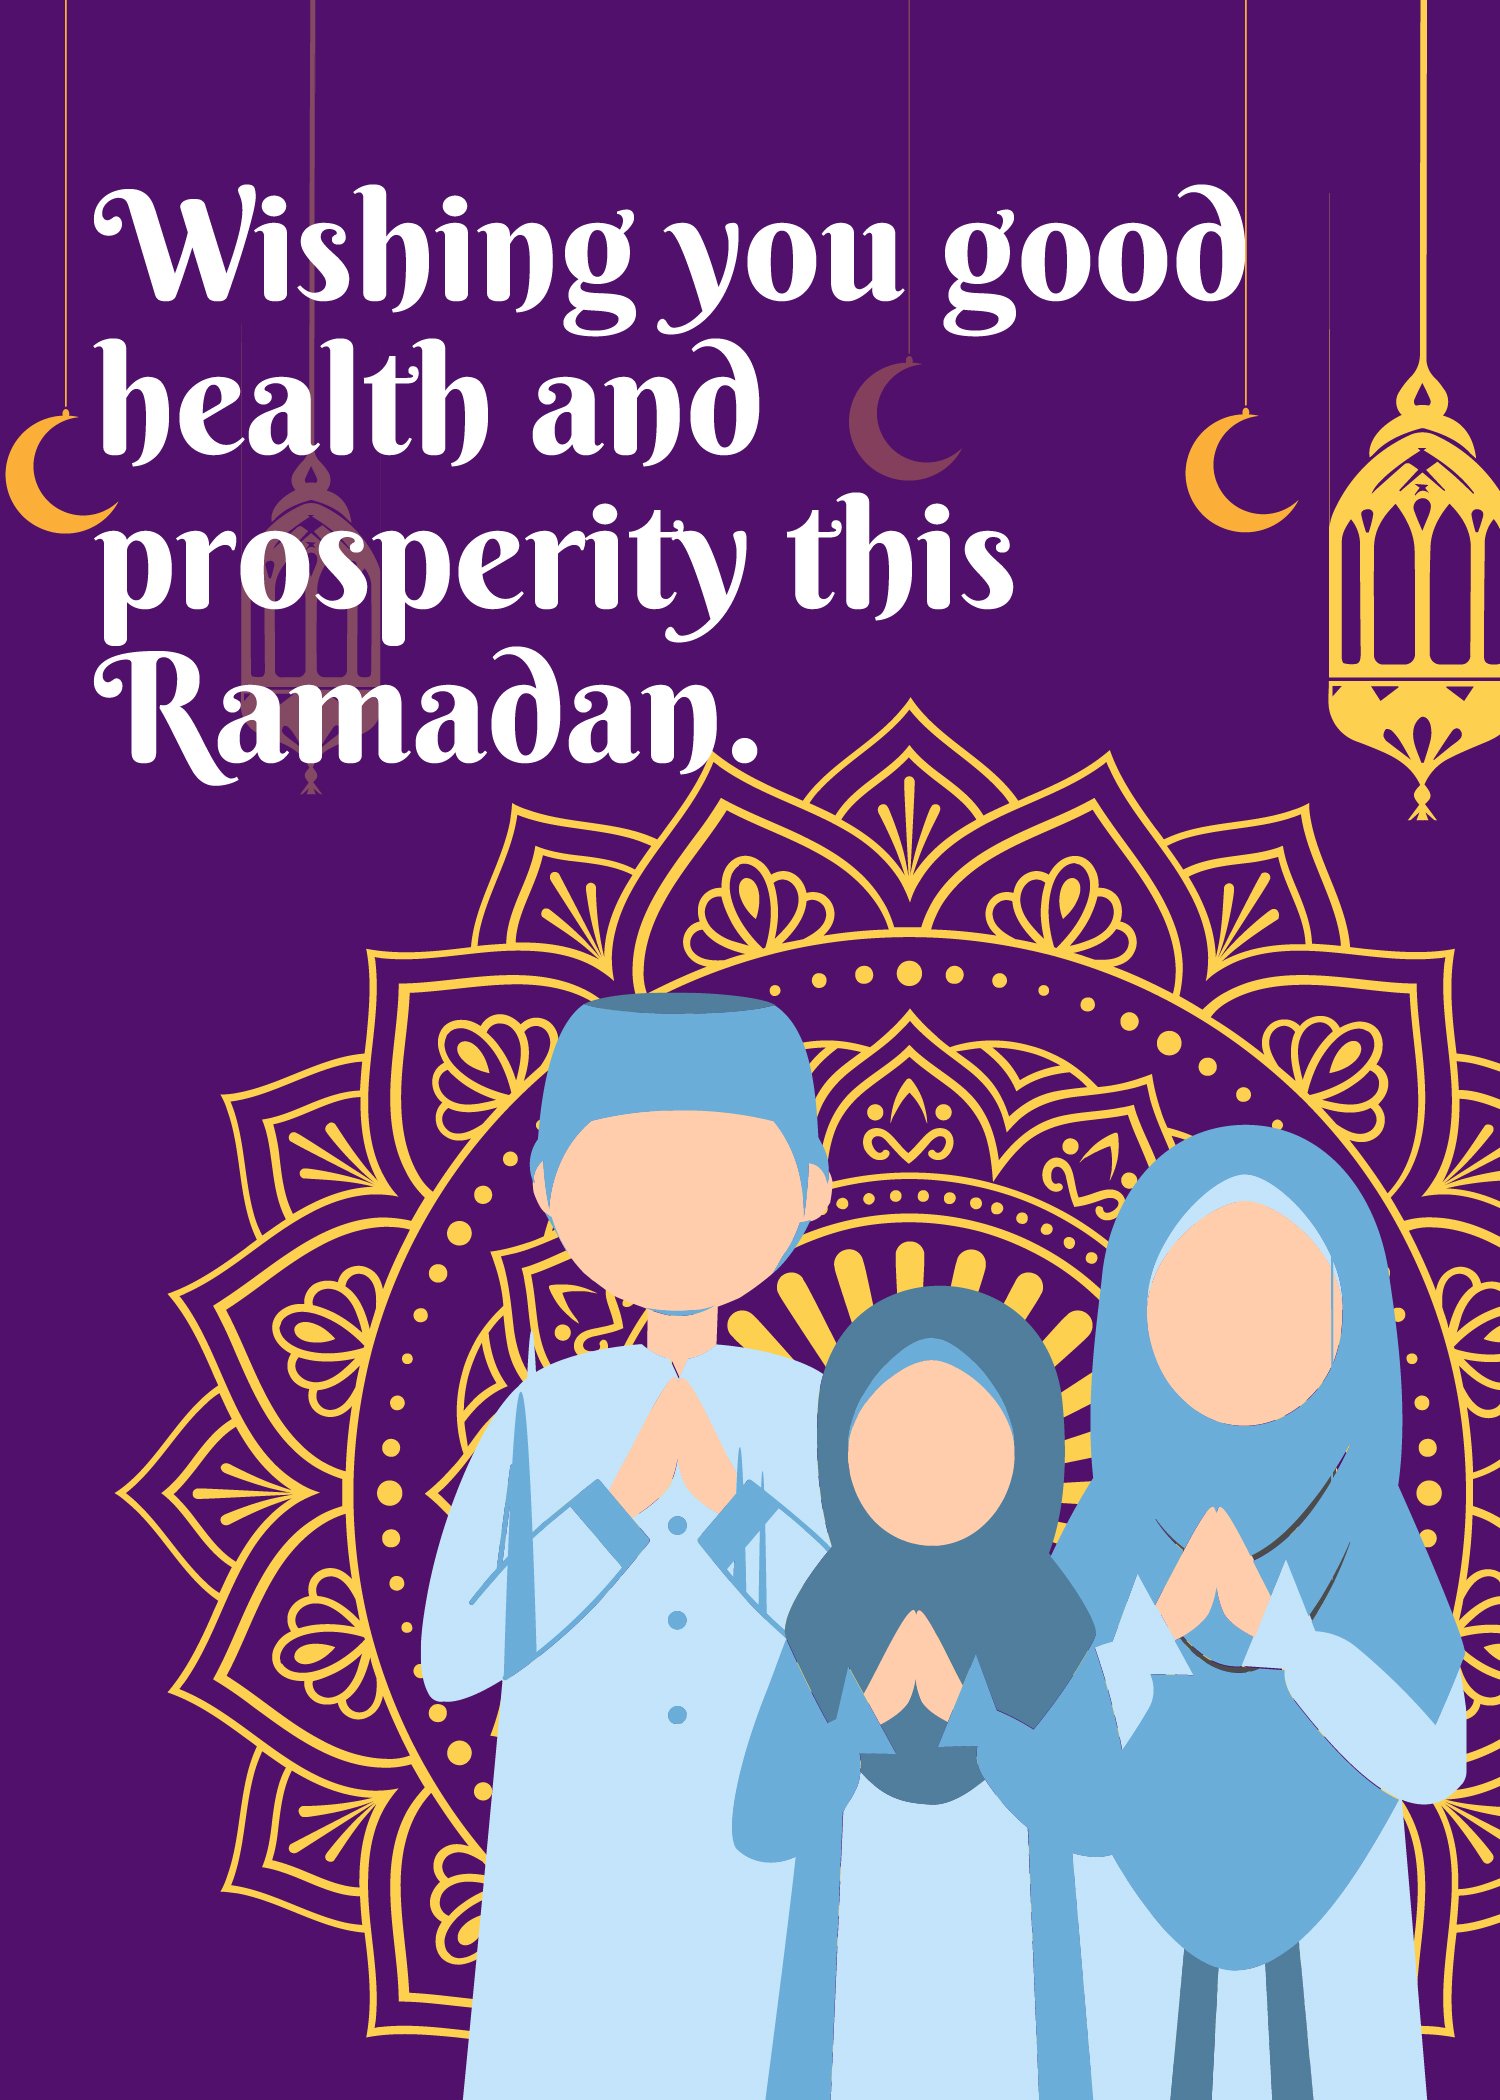 Ramadan Wishes in Word, Google Docs, Illustrator, PSD, Apple Pages, EPS, SVG, JPG, PNG